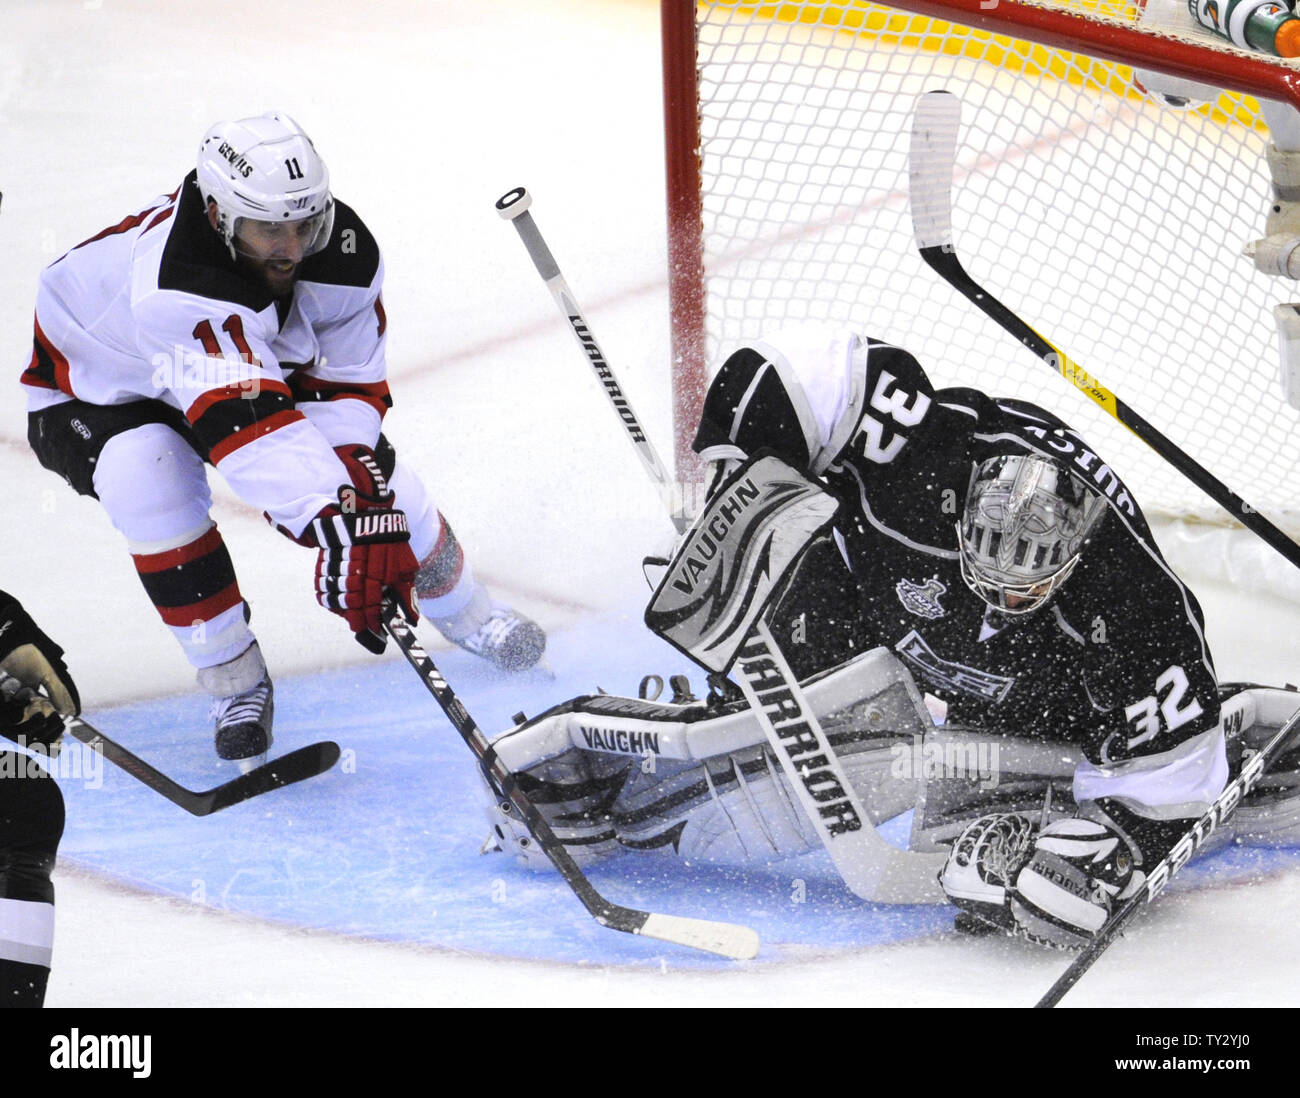 Los Angeles Kings goalies Stephane First looks at the second goal